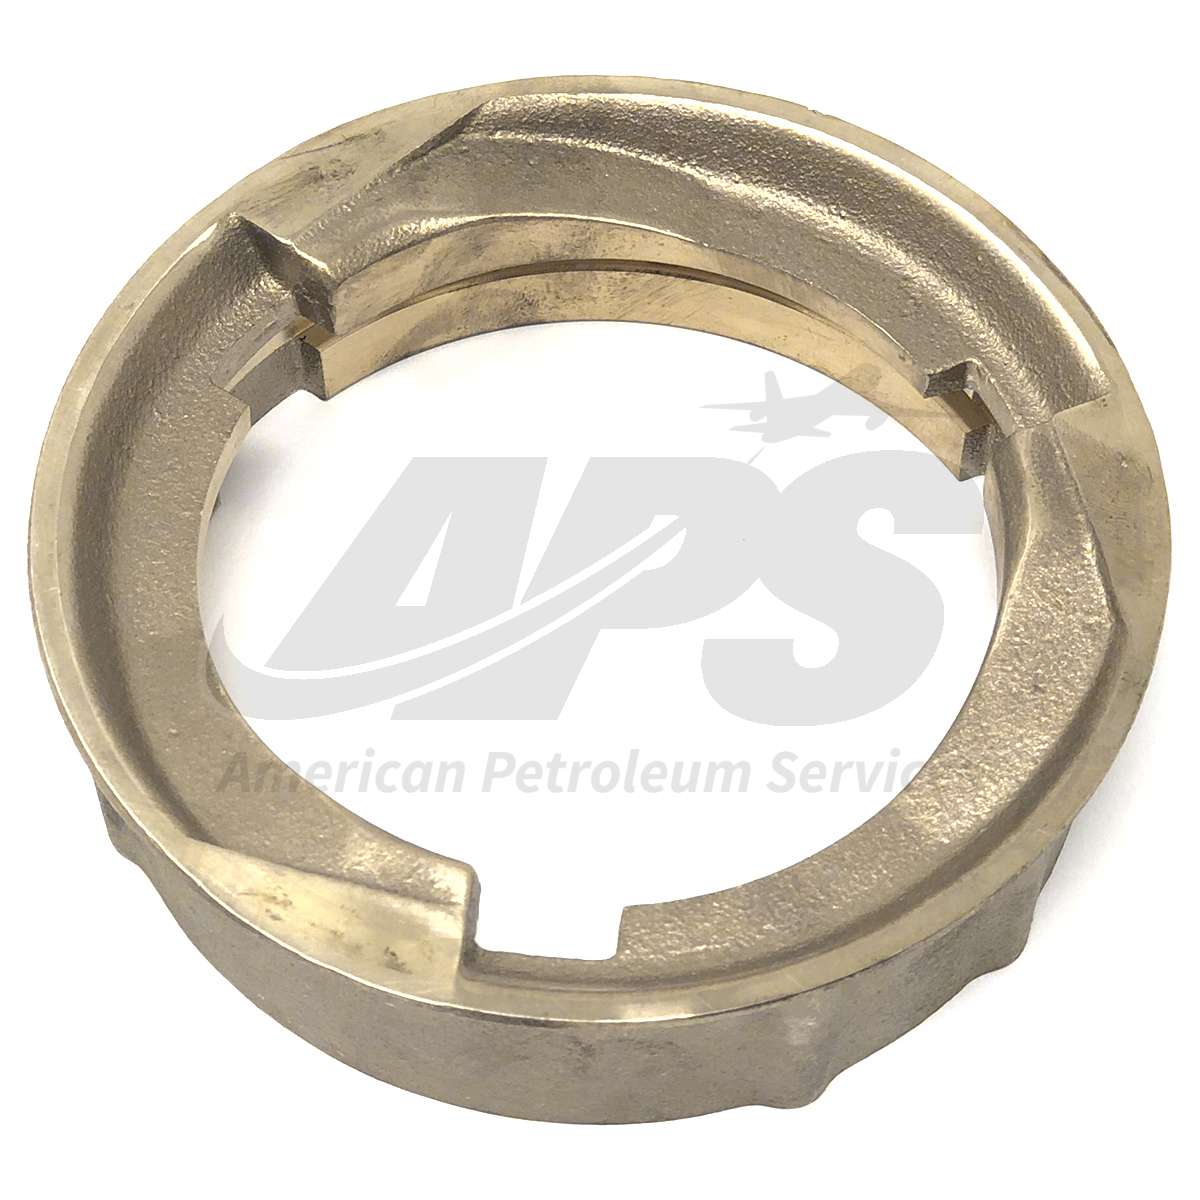 Details about   HAMILTON SUNDSTRAND 700532 PISTON SWITCH FOR F-16 F4N C-5 5930-00-912-2143 